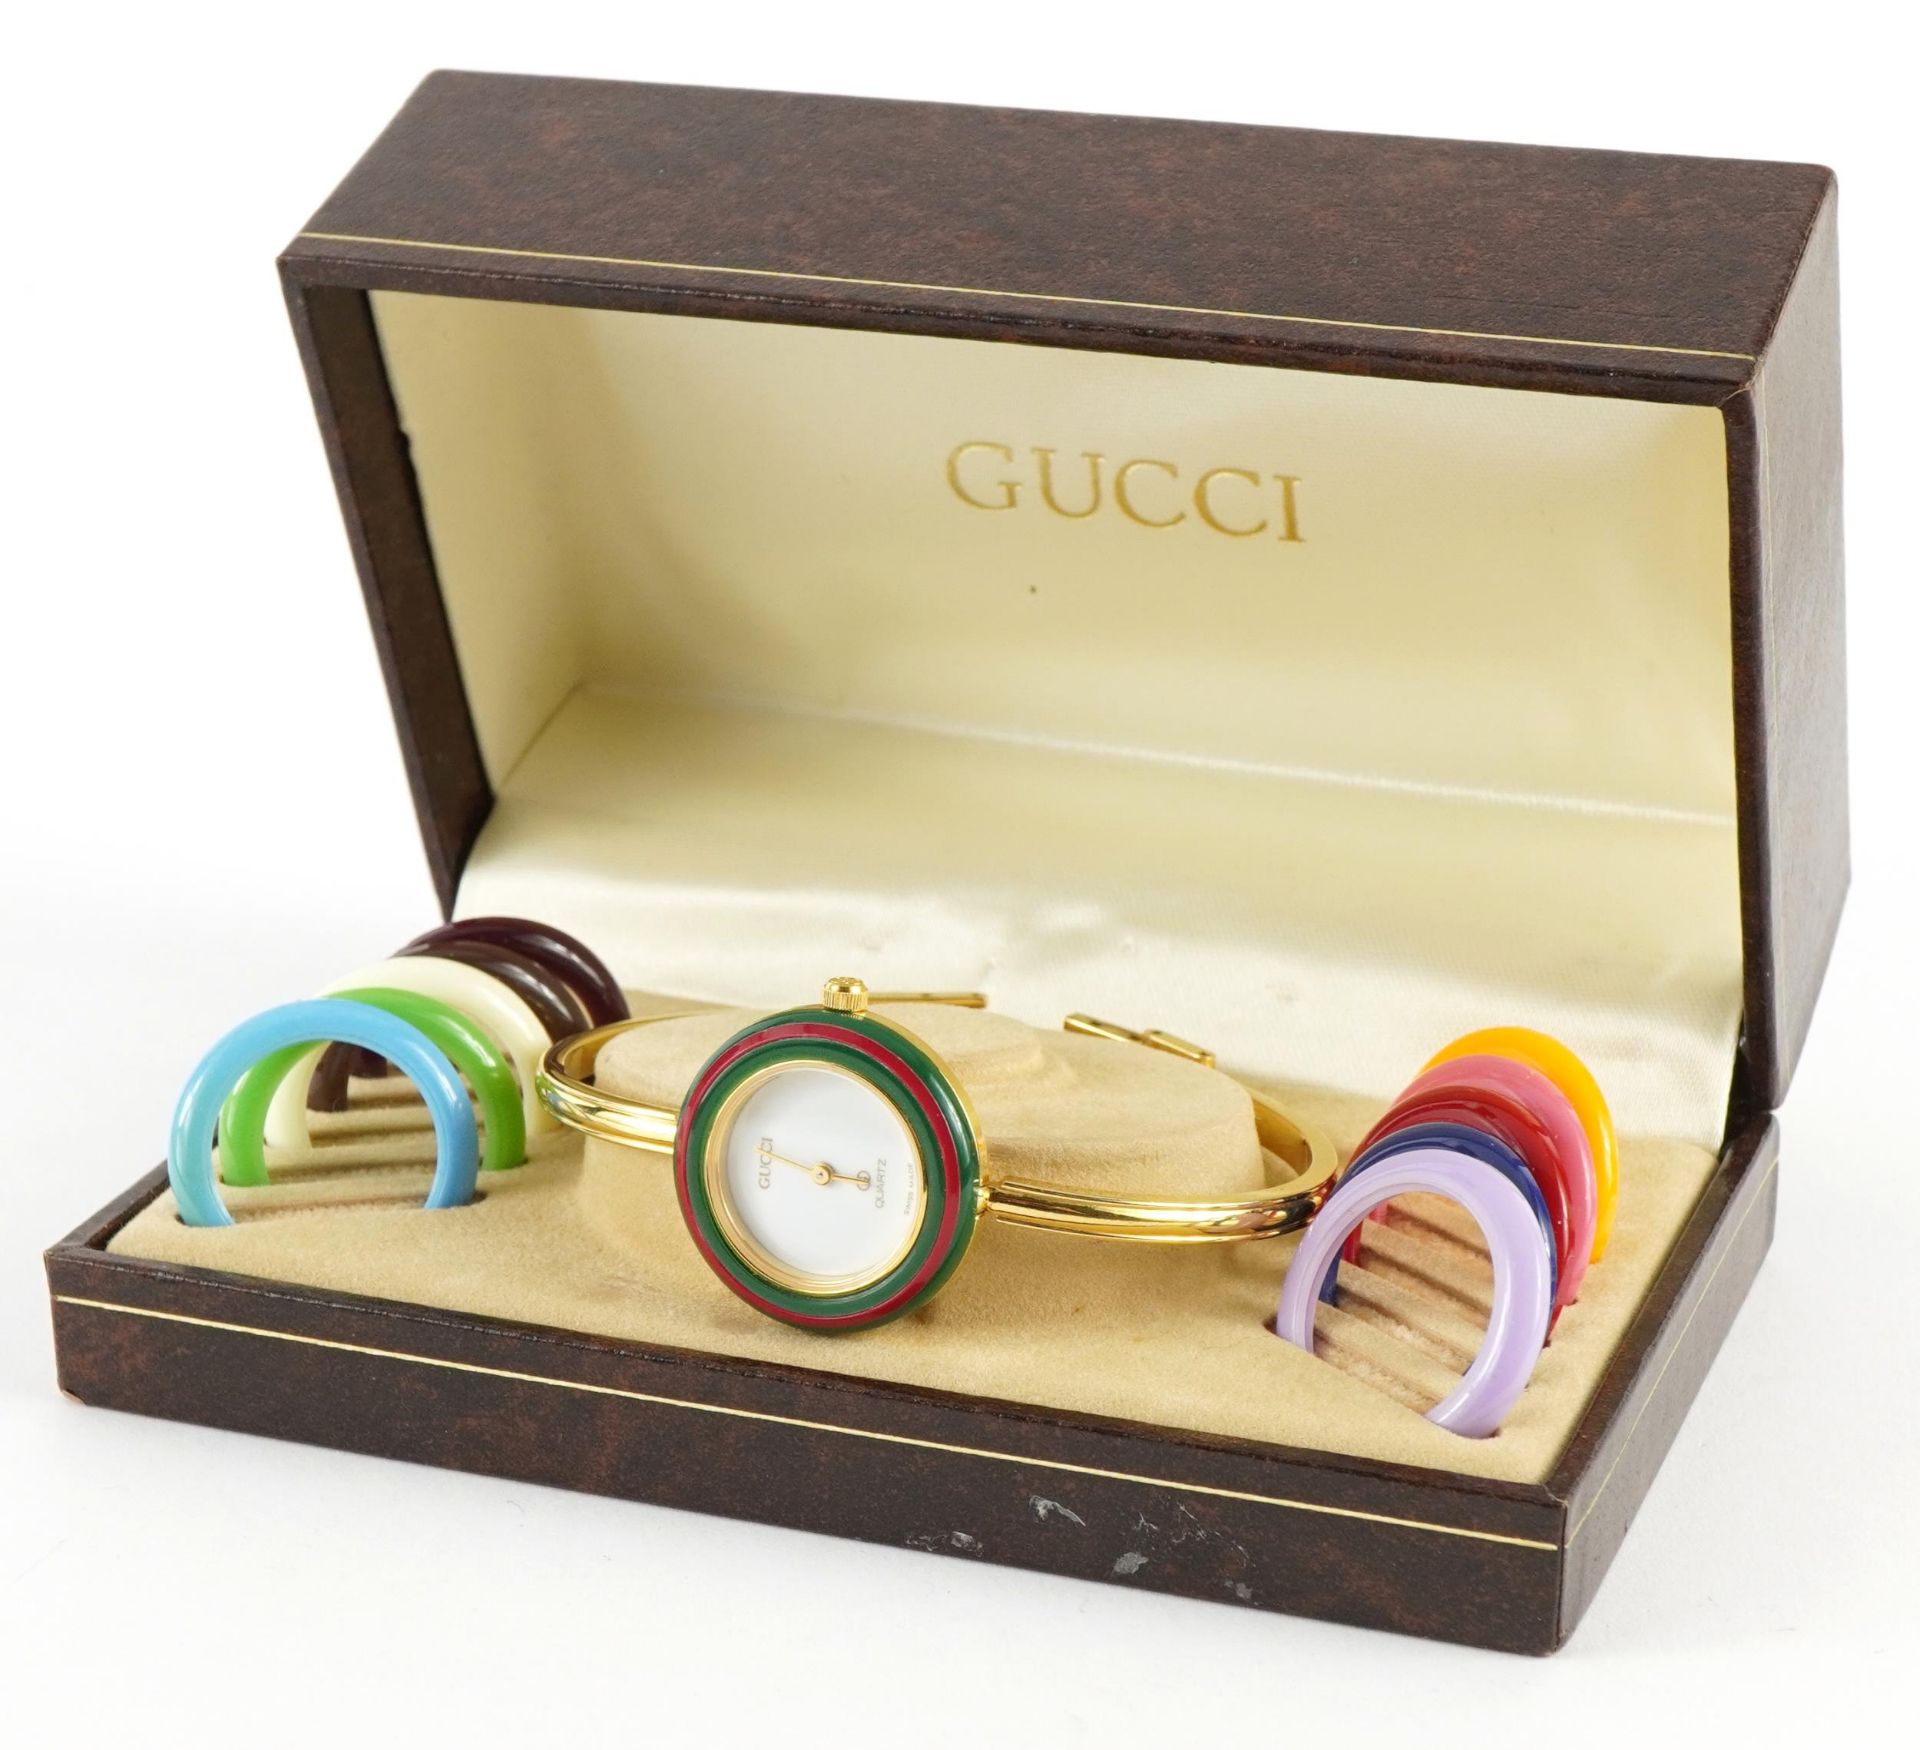 Ladies Gucci quartz wristwatch with interchangeable bezels and Gucci box, the case numbered 1100-L